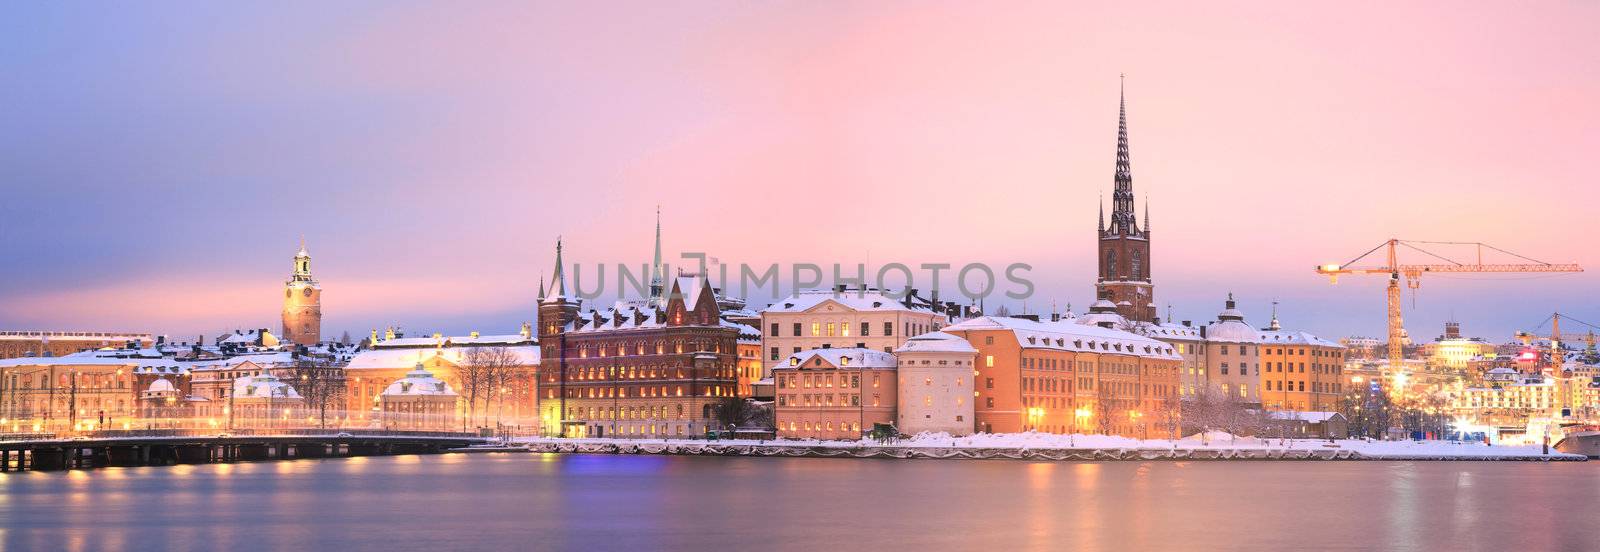 Stockholm Panorama by vichie81